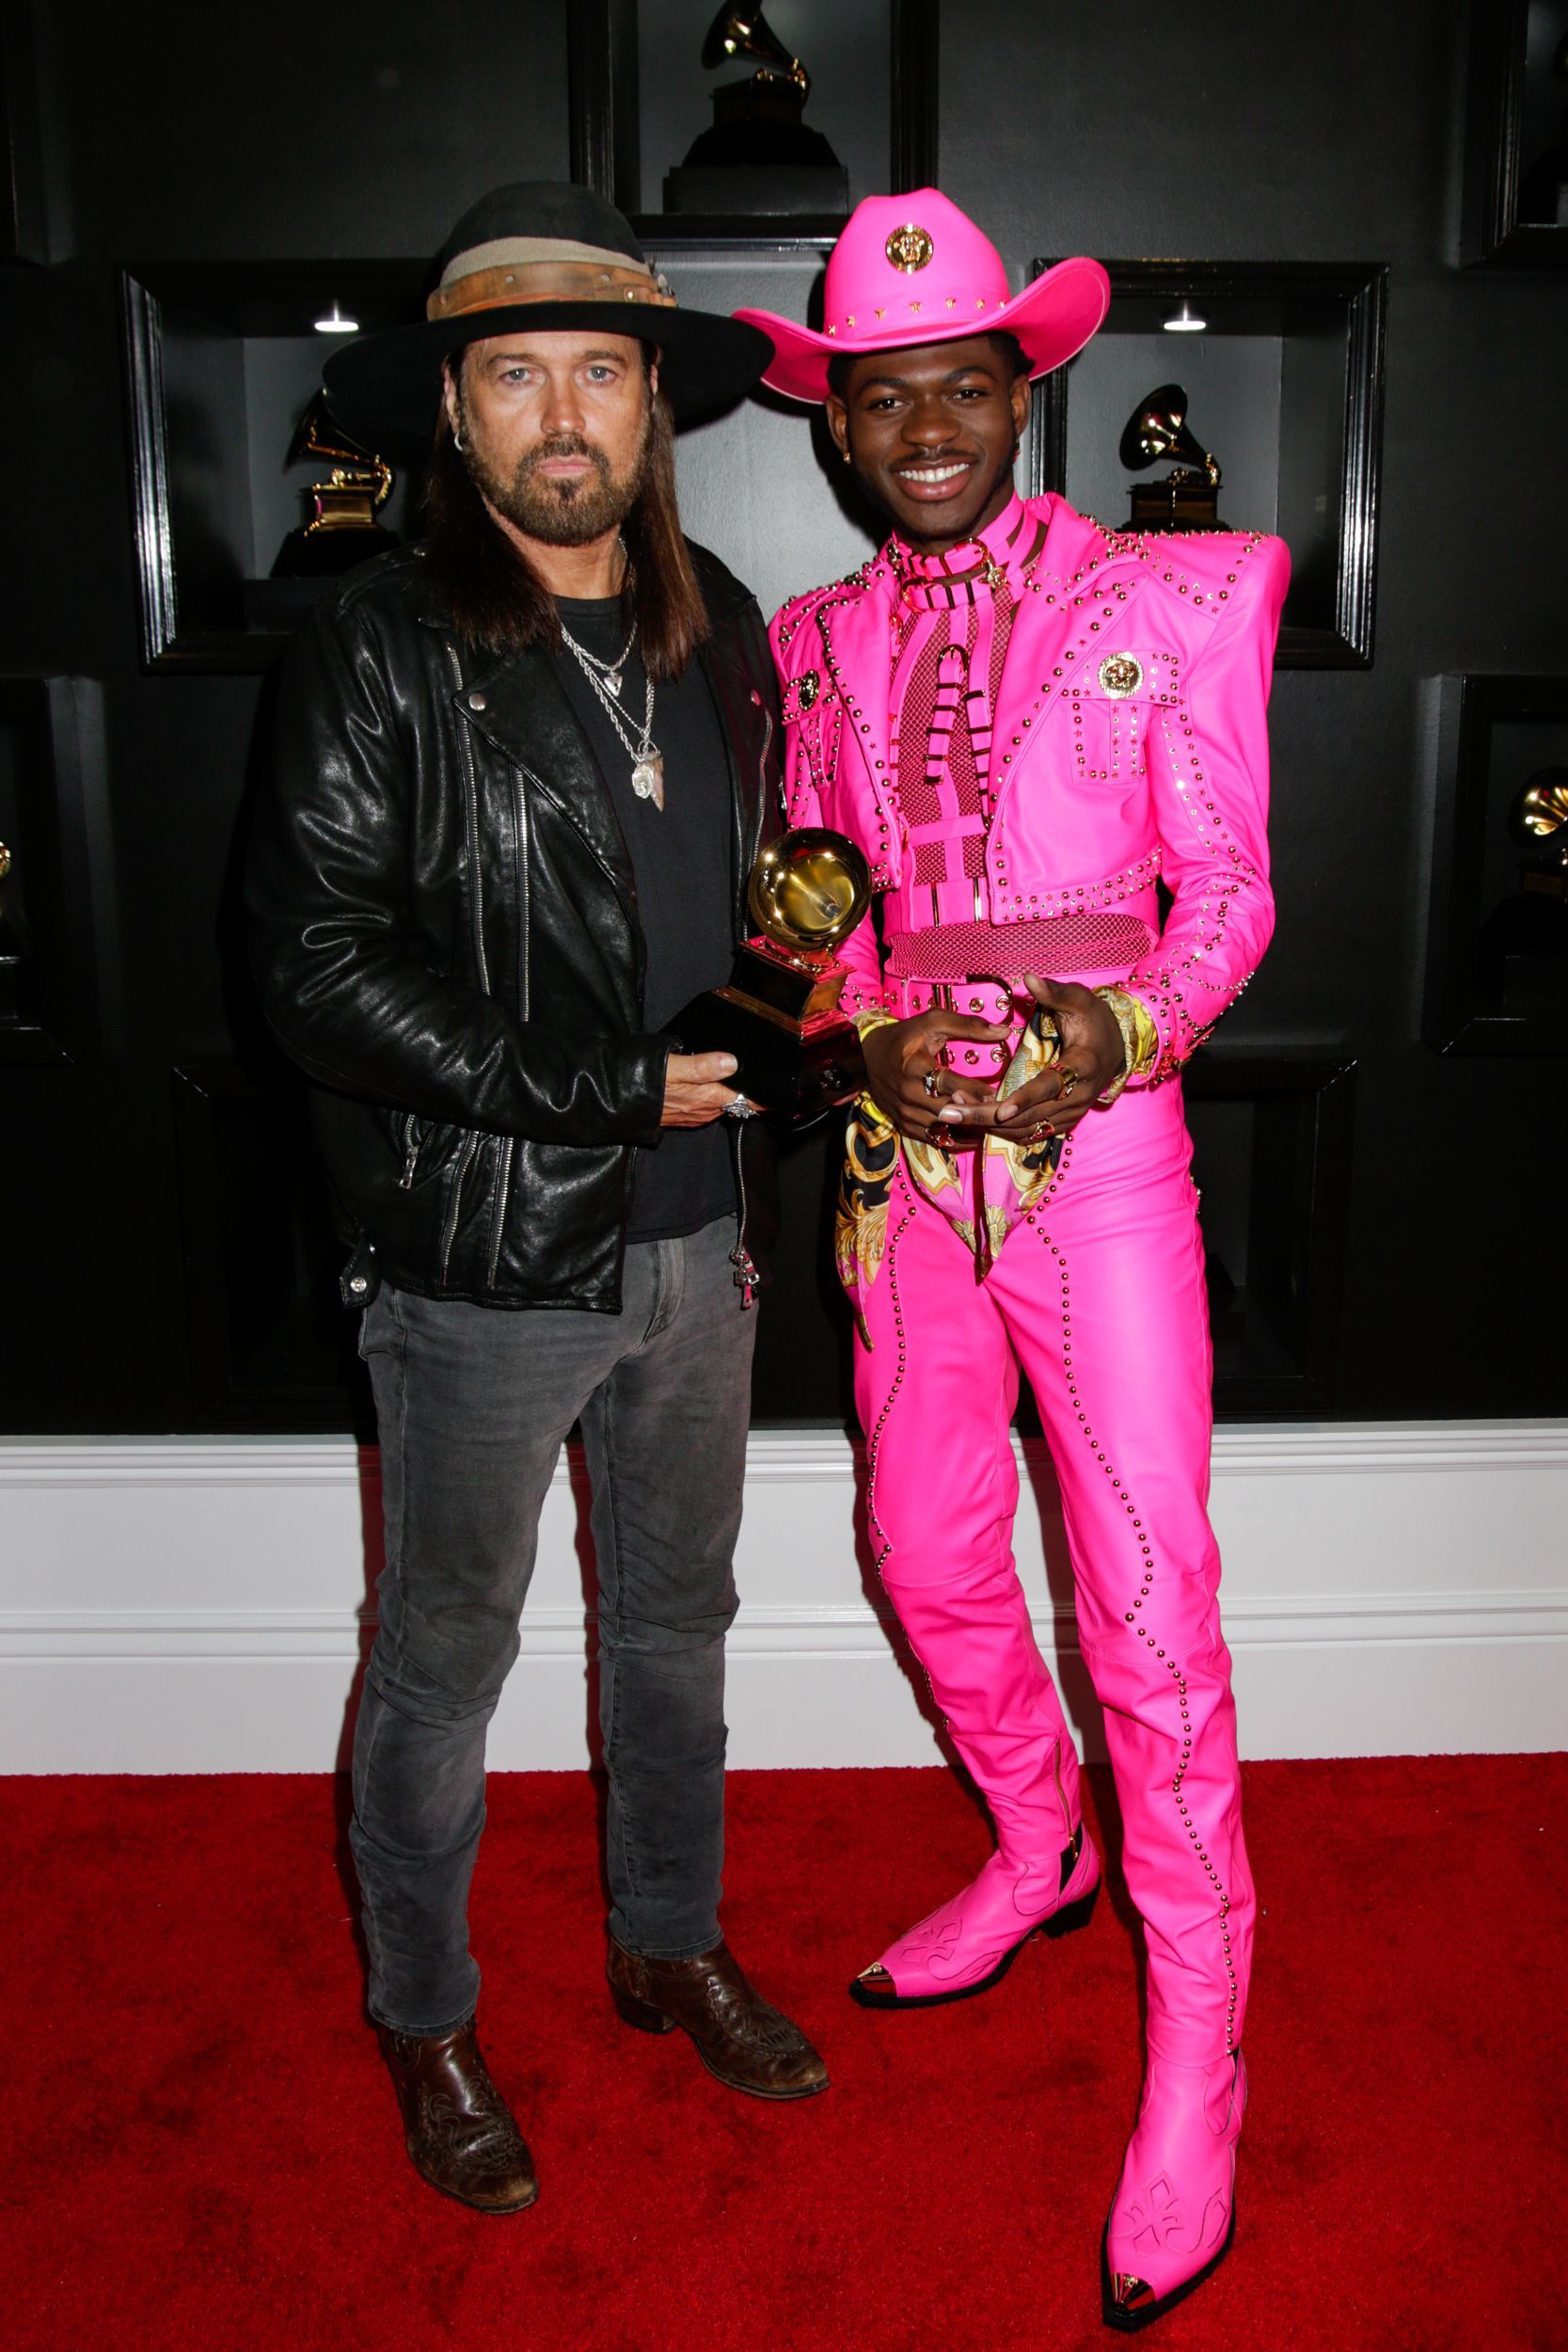 Billy Ray Cyrus and Lil Nas X Together